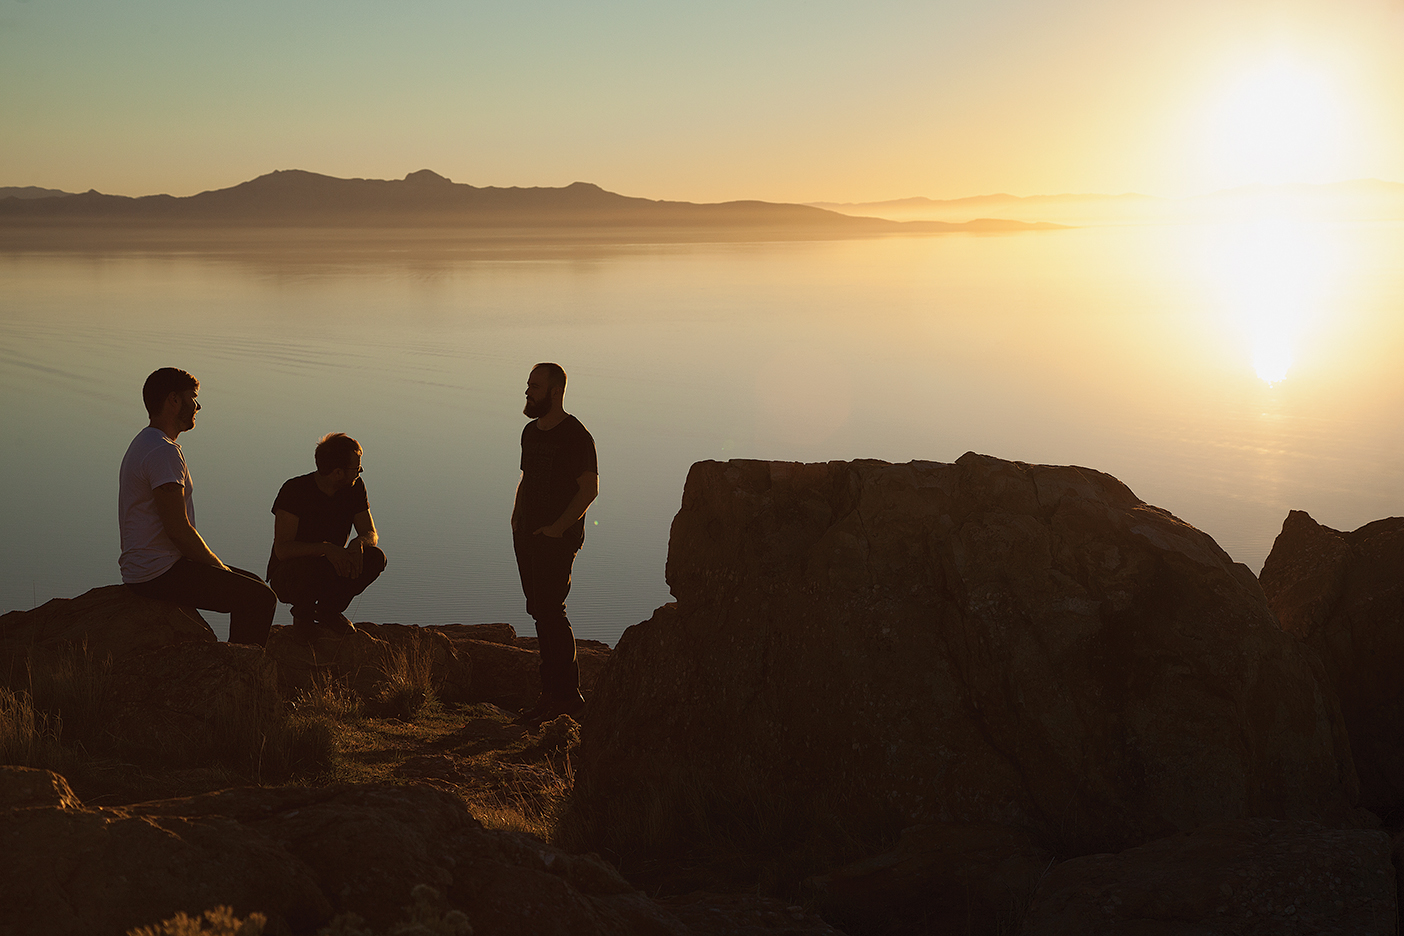 band members sit on rocks near water as the sun sets